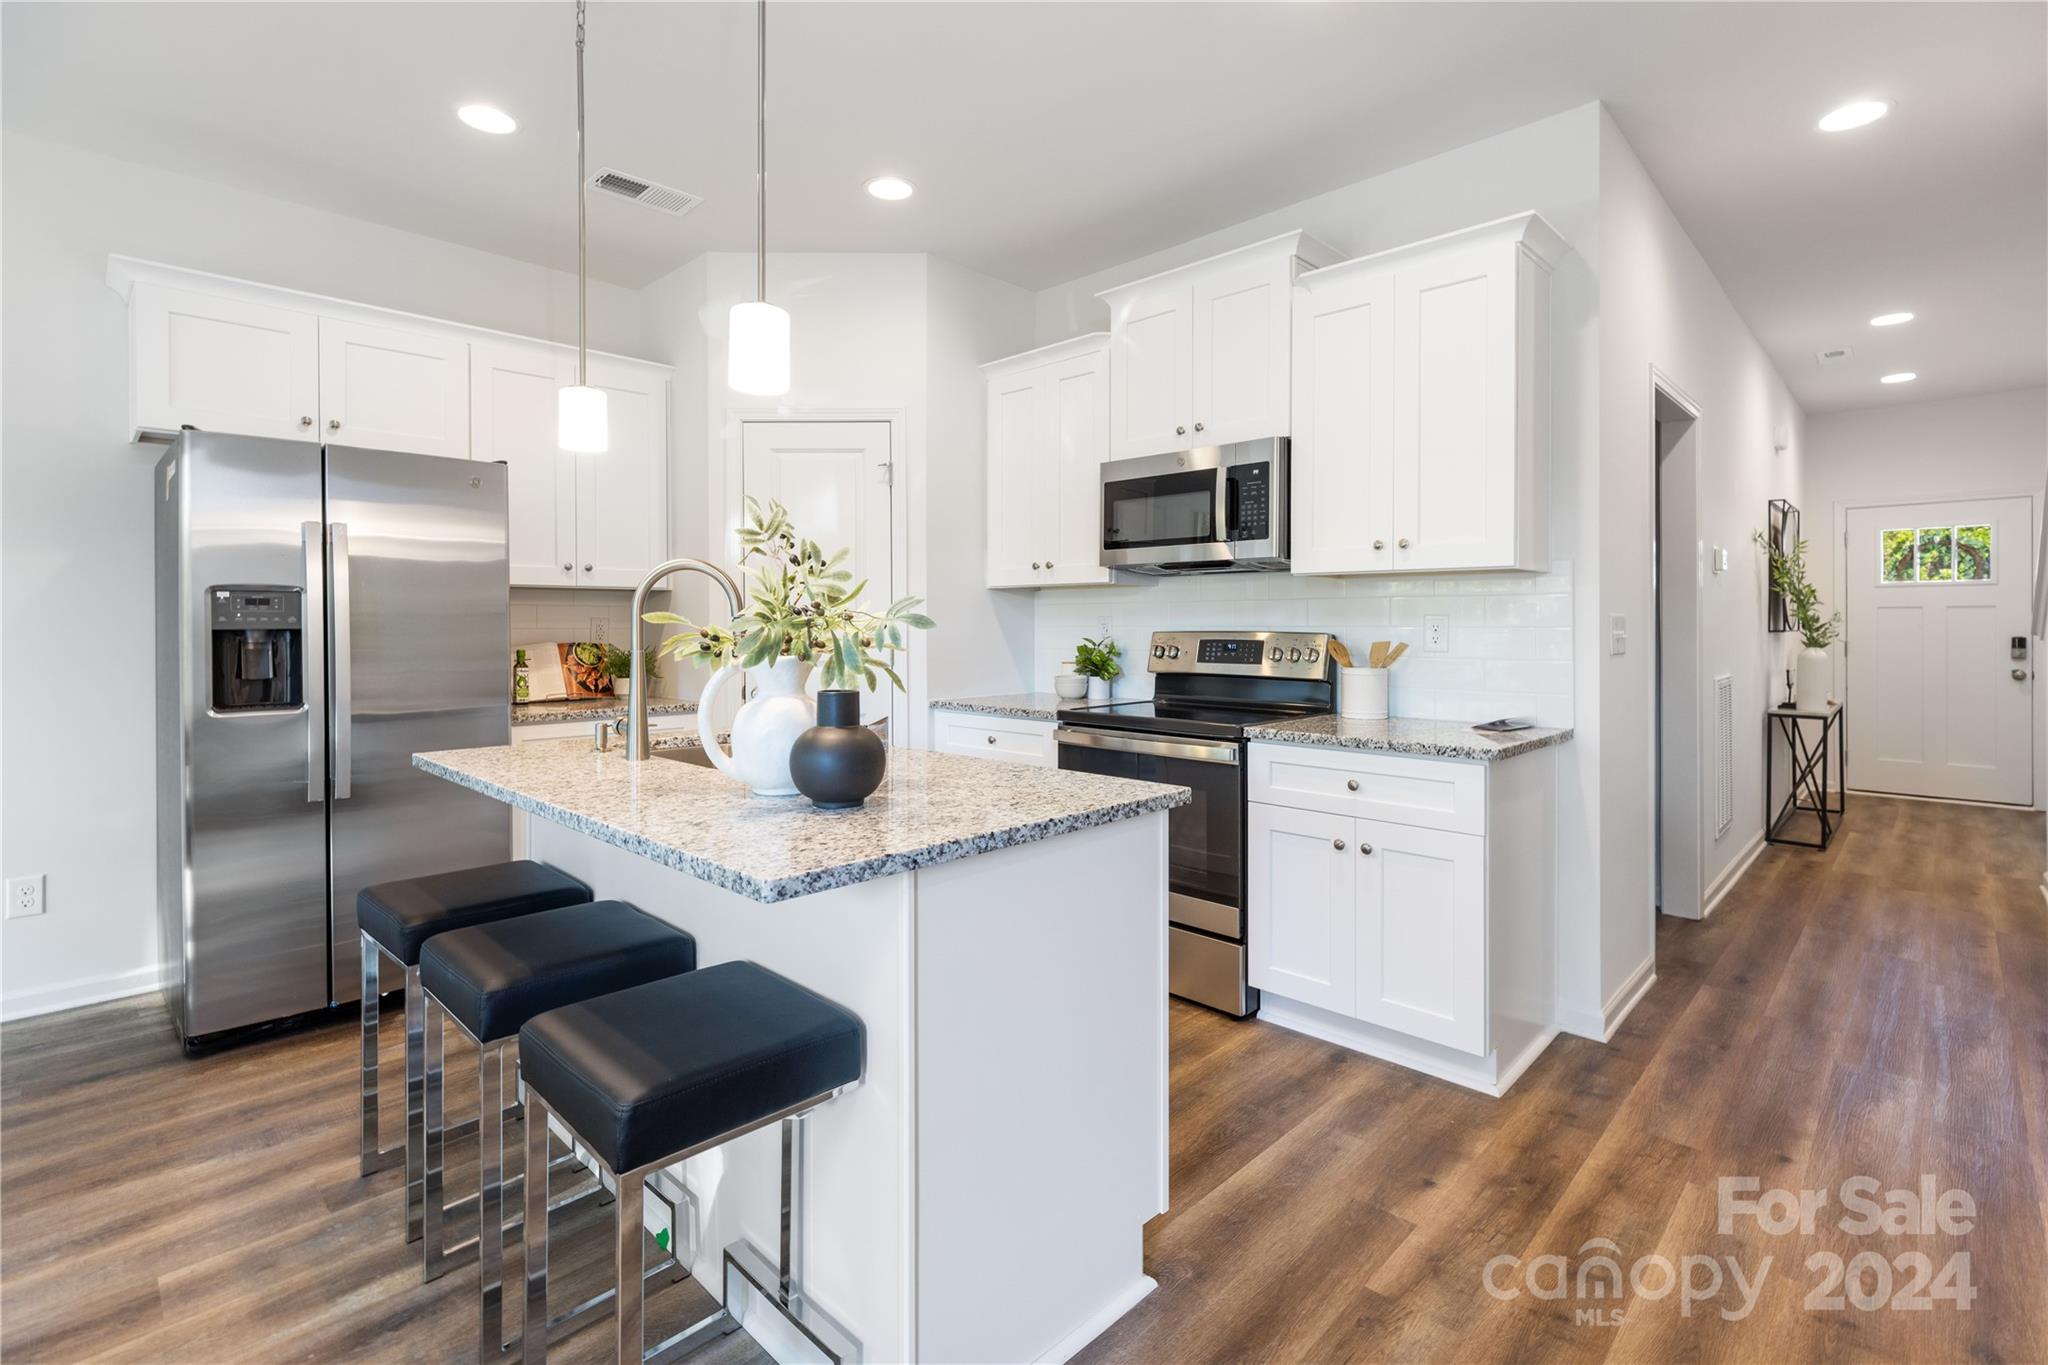 a kitchen with stainless steel appliances kitchen island granite countertop a refrigerator a sink dishwasher a stove and white cabinets with wooden floor